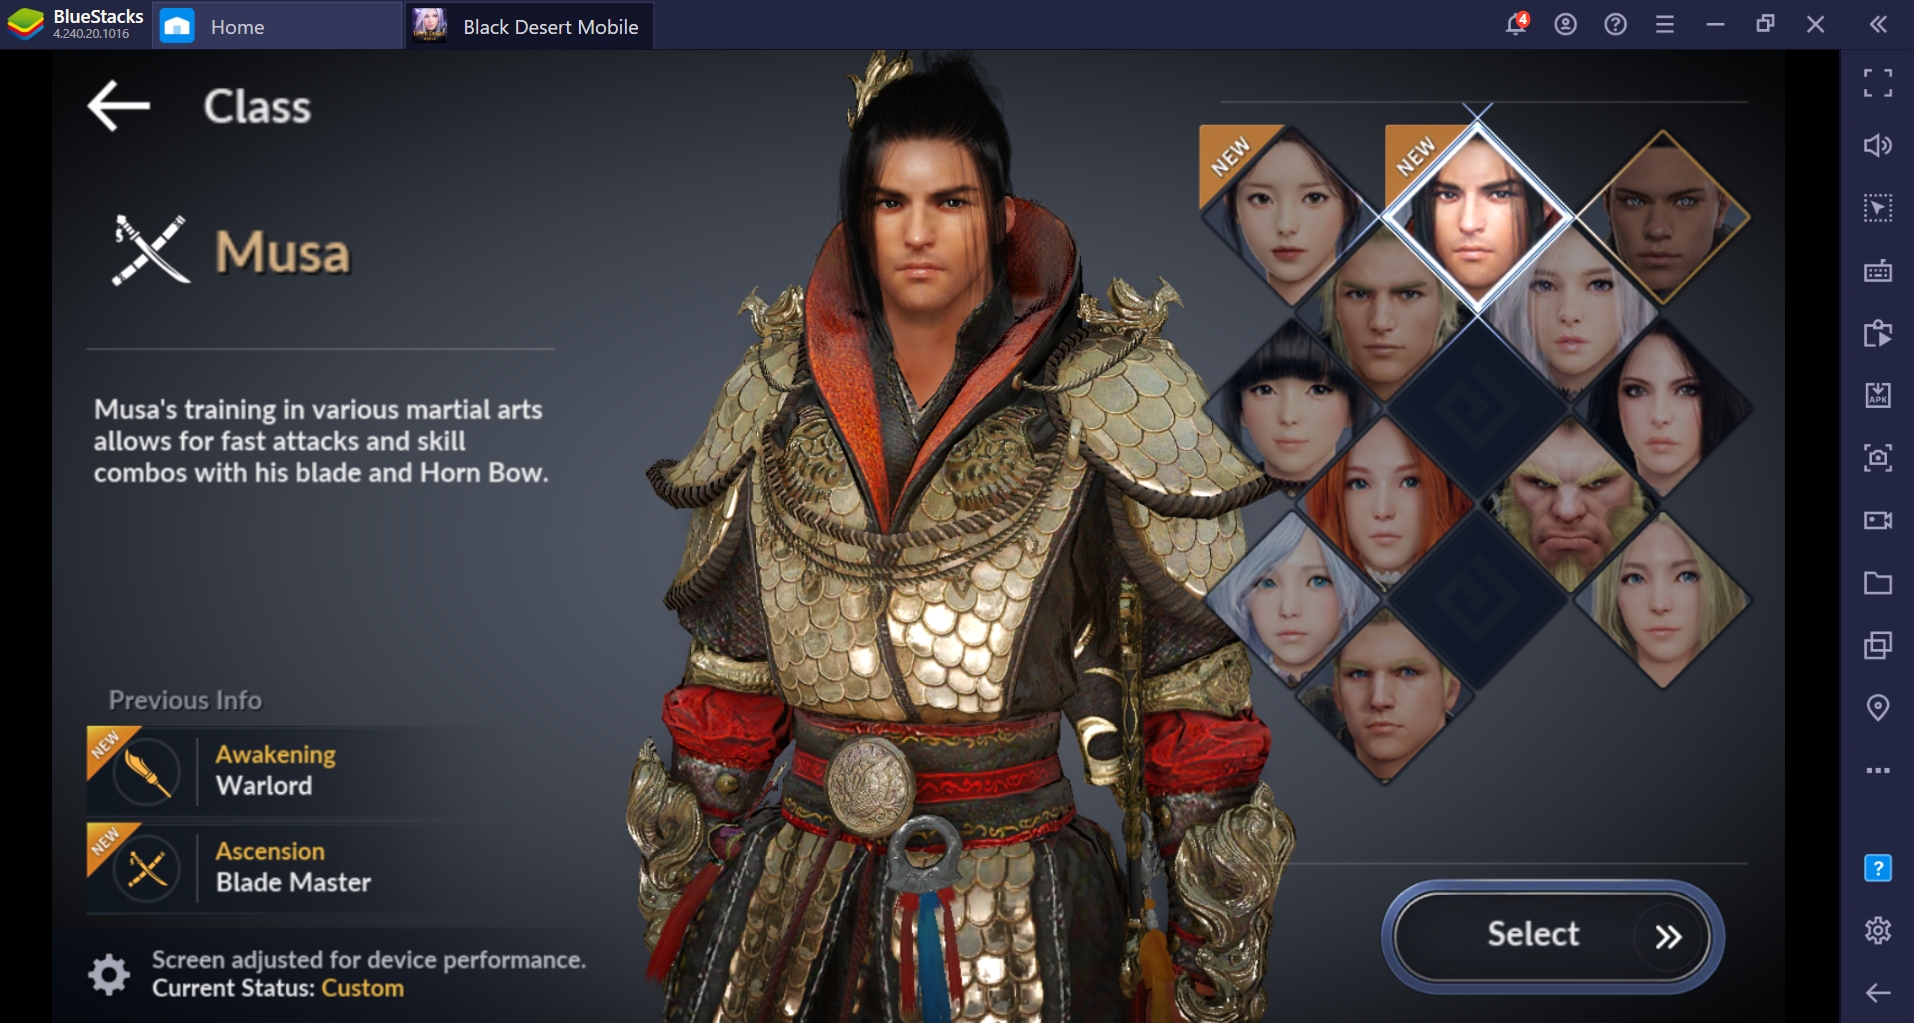 Black Desert Mobile Introduces 2 New Classes ‘Musa’ and ‘Maewha